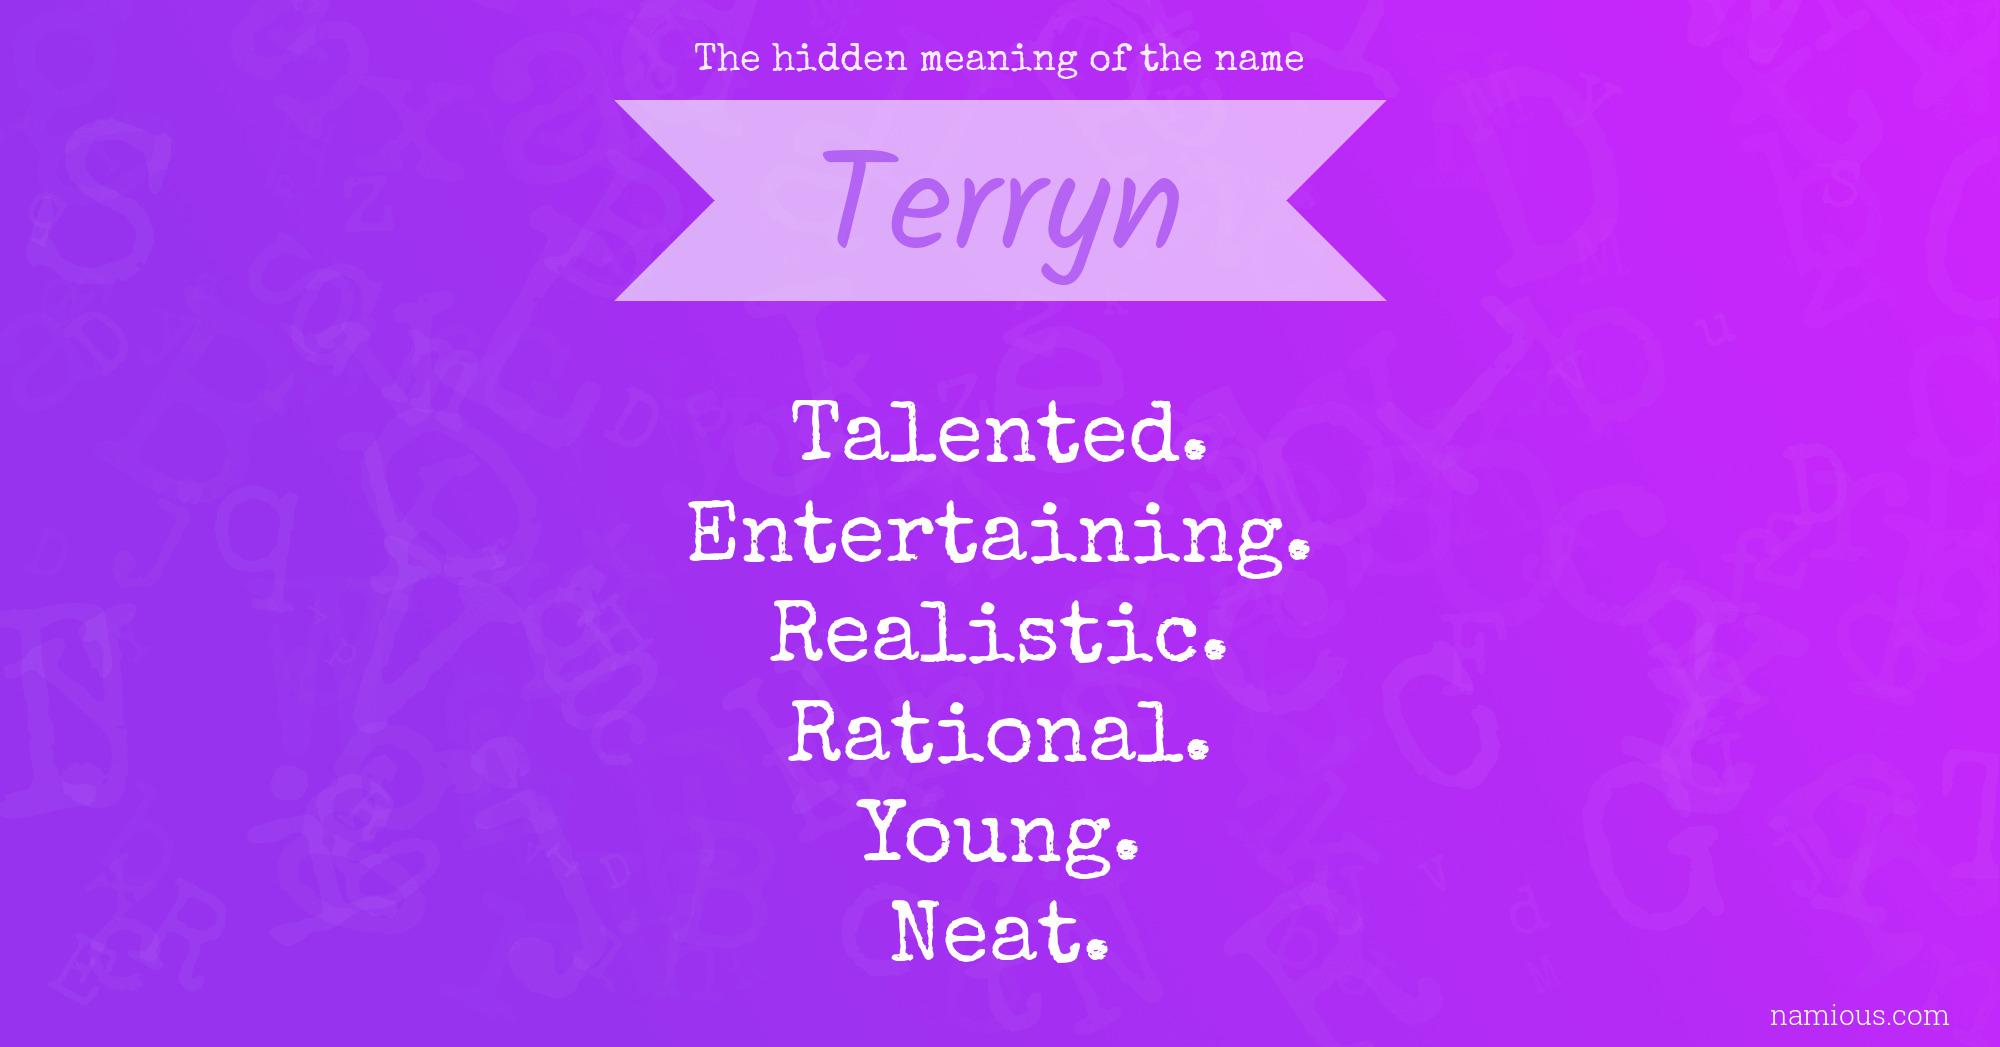 The hidden meaning of the name Terryn